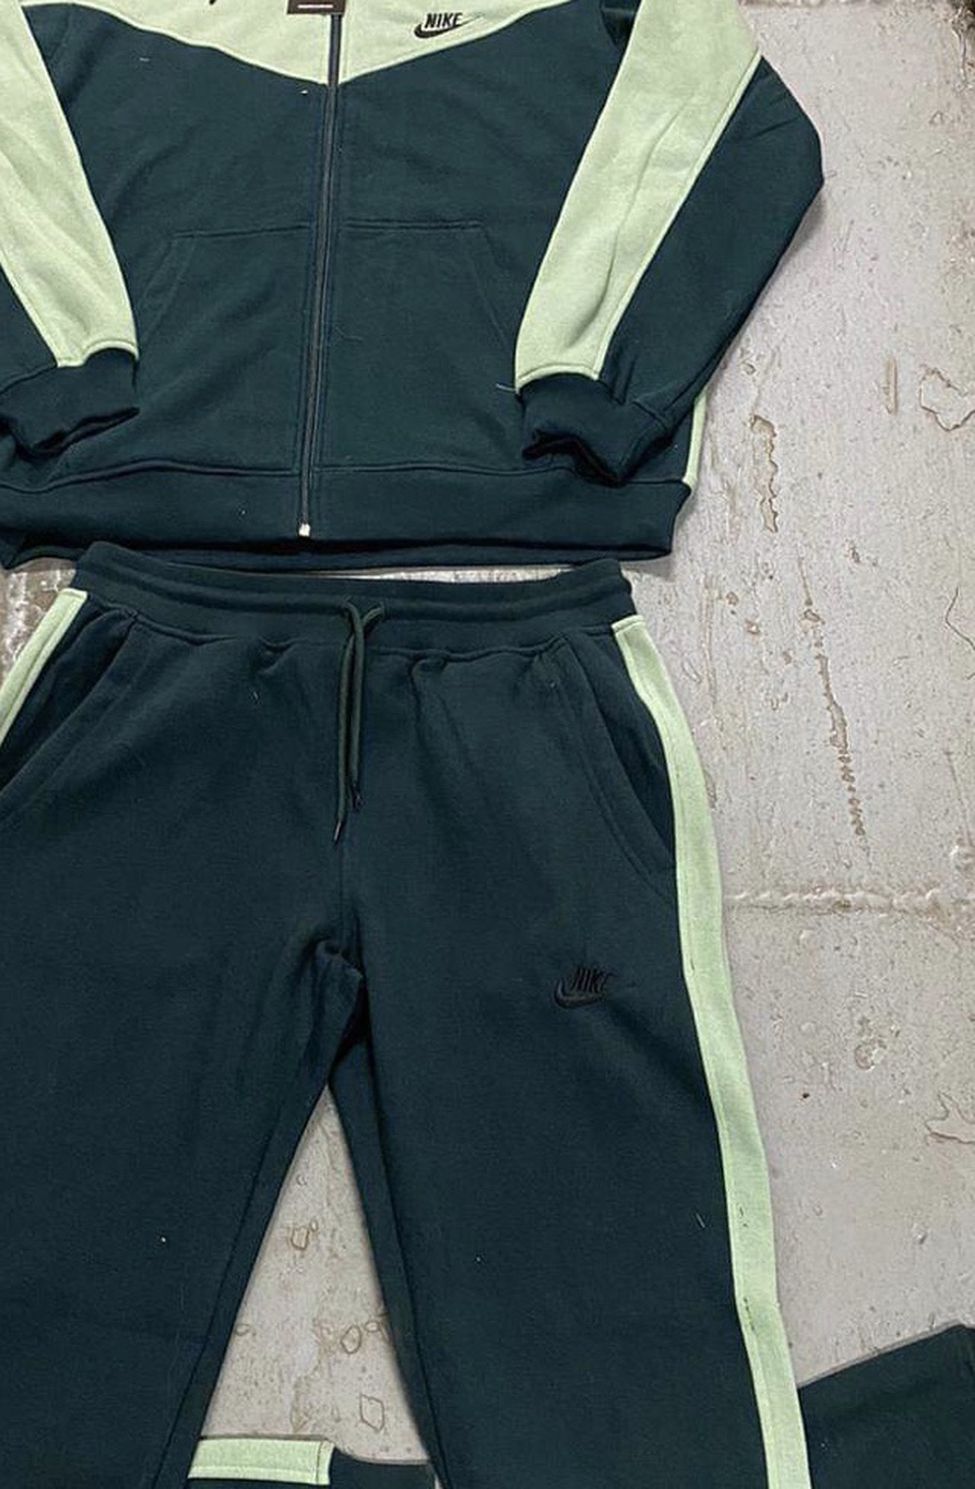 Nike Sweatsuits (ALL COLORS)